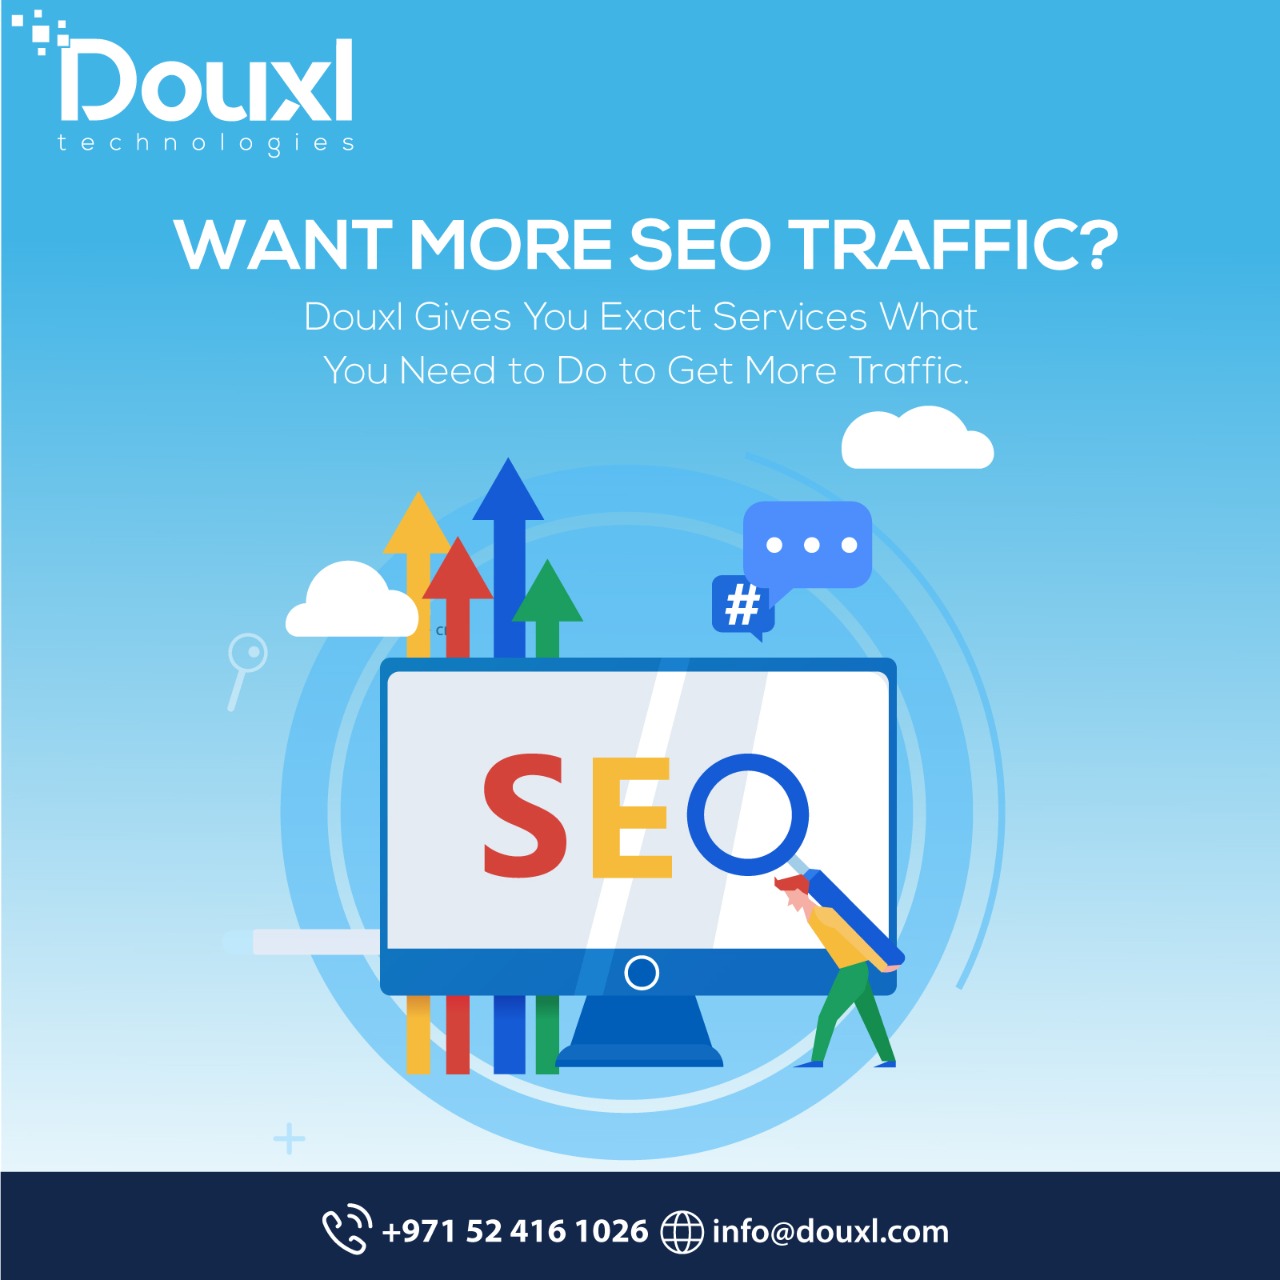 Which Are the Leading SEO Services in UAE?